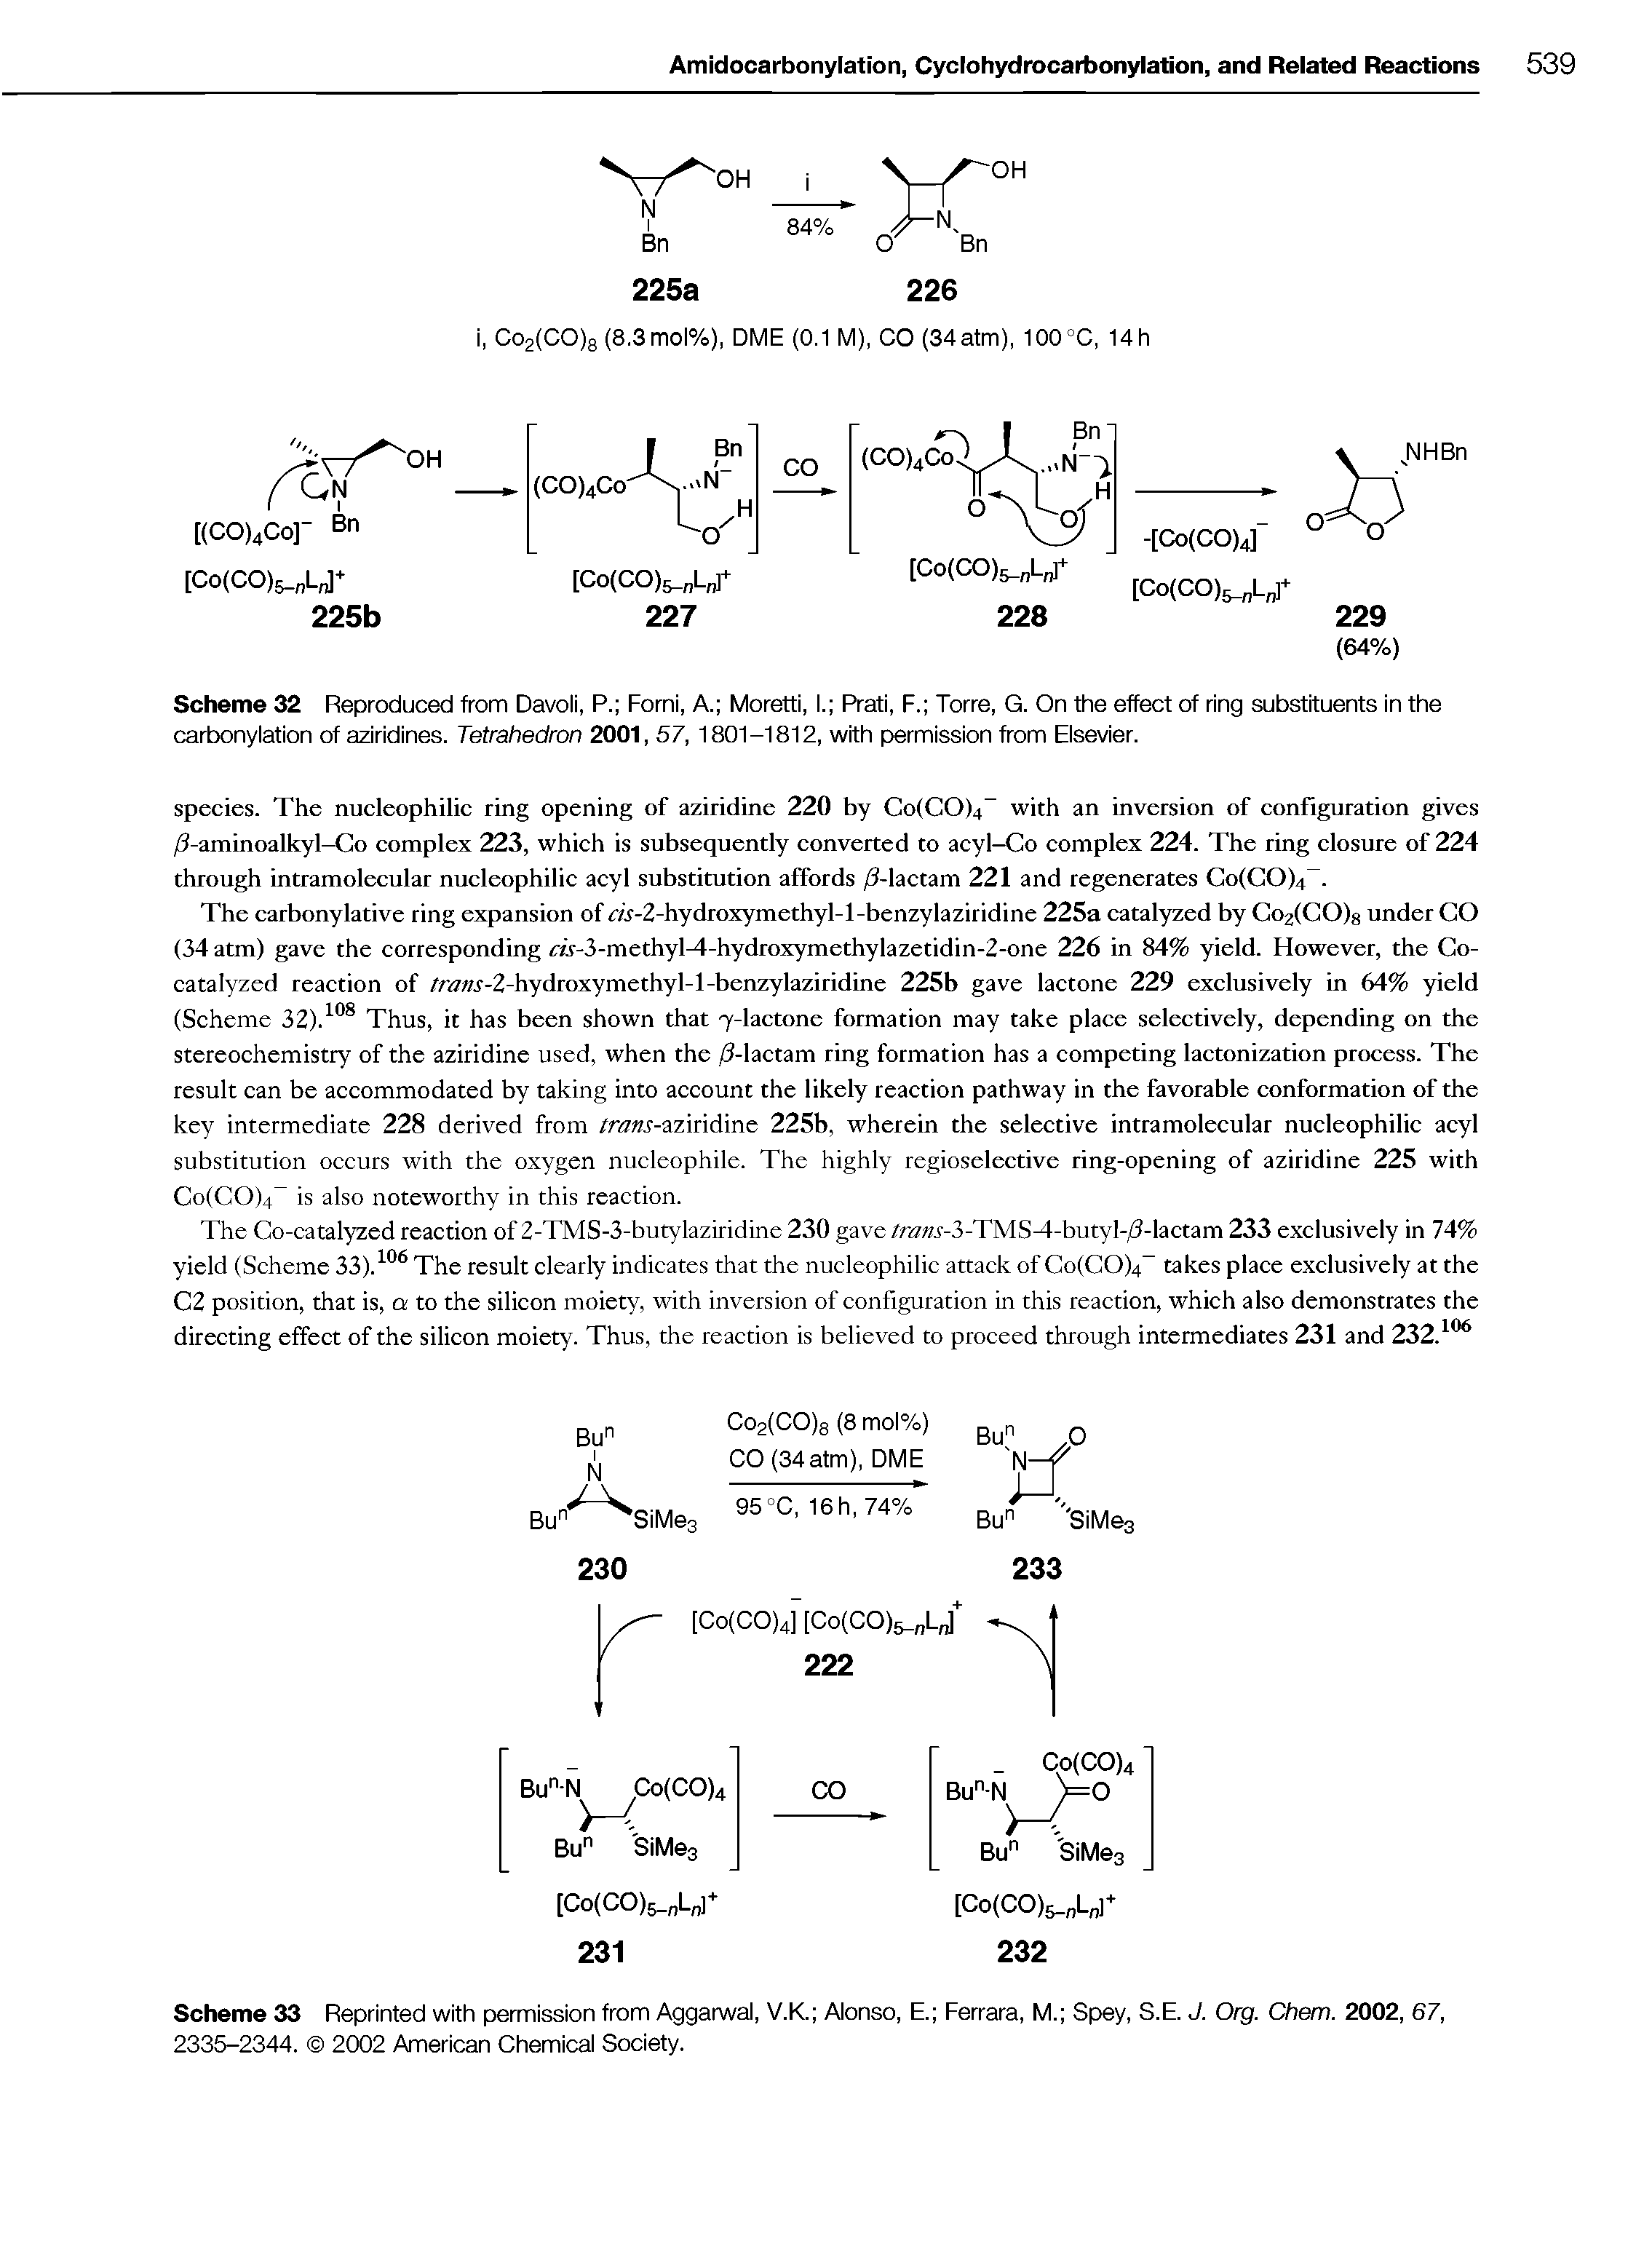 Scheme 32 Reproduced from Davoli, P. Forni, A. Moretti, I. Prati, F. Torre, G. On the effect of ring substituents in the carbonyiation of aziridines. Tetrahedron 2001,57, 1801-1812, with permission from Eisevier.